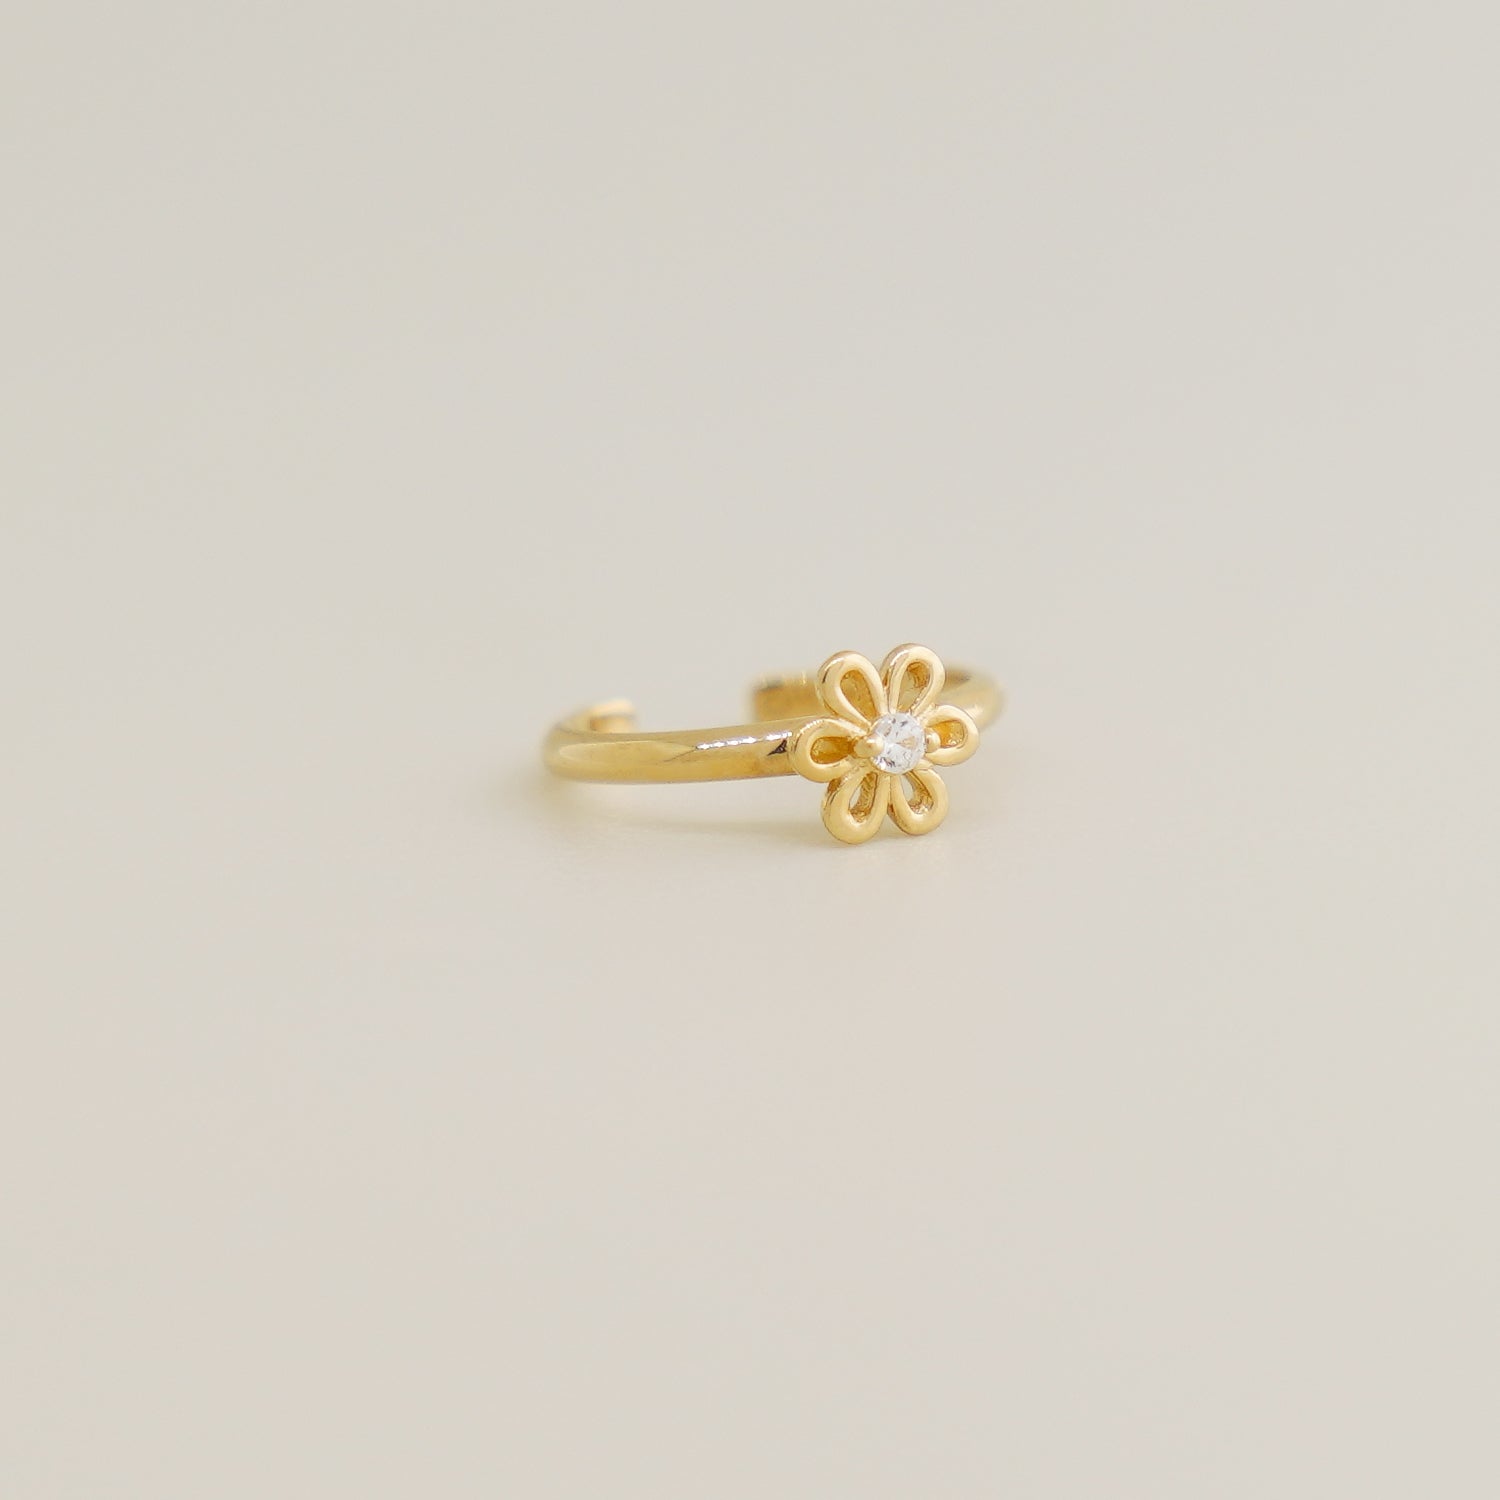 14K Solid Gold CZ Daisy Flower Ear Cuff - anygolds